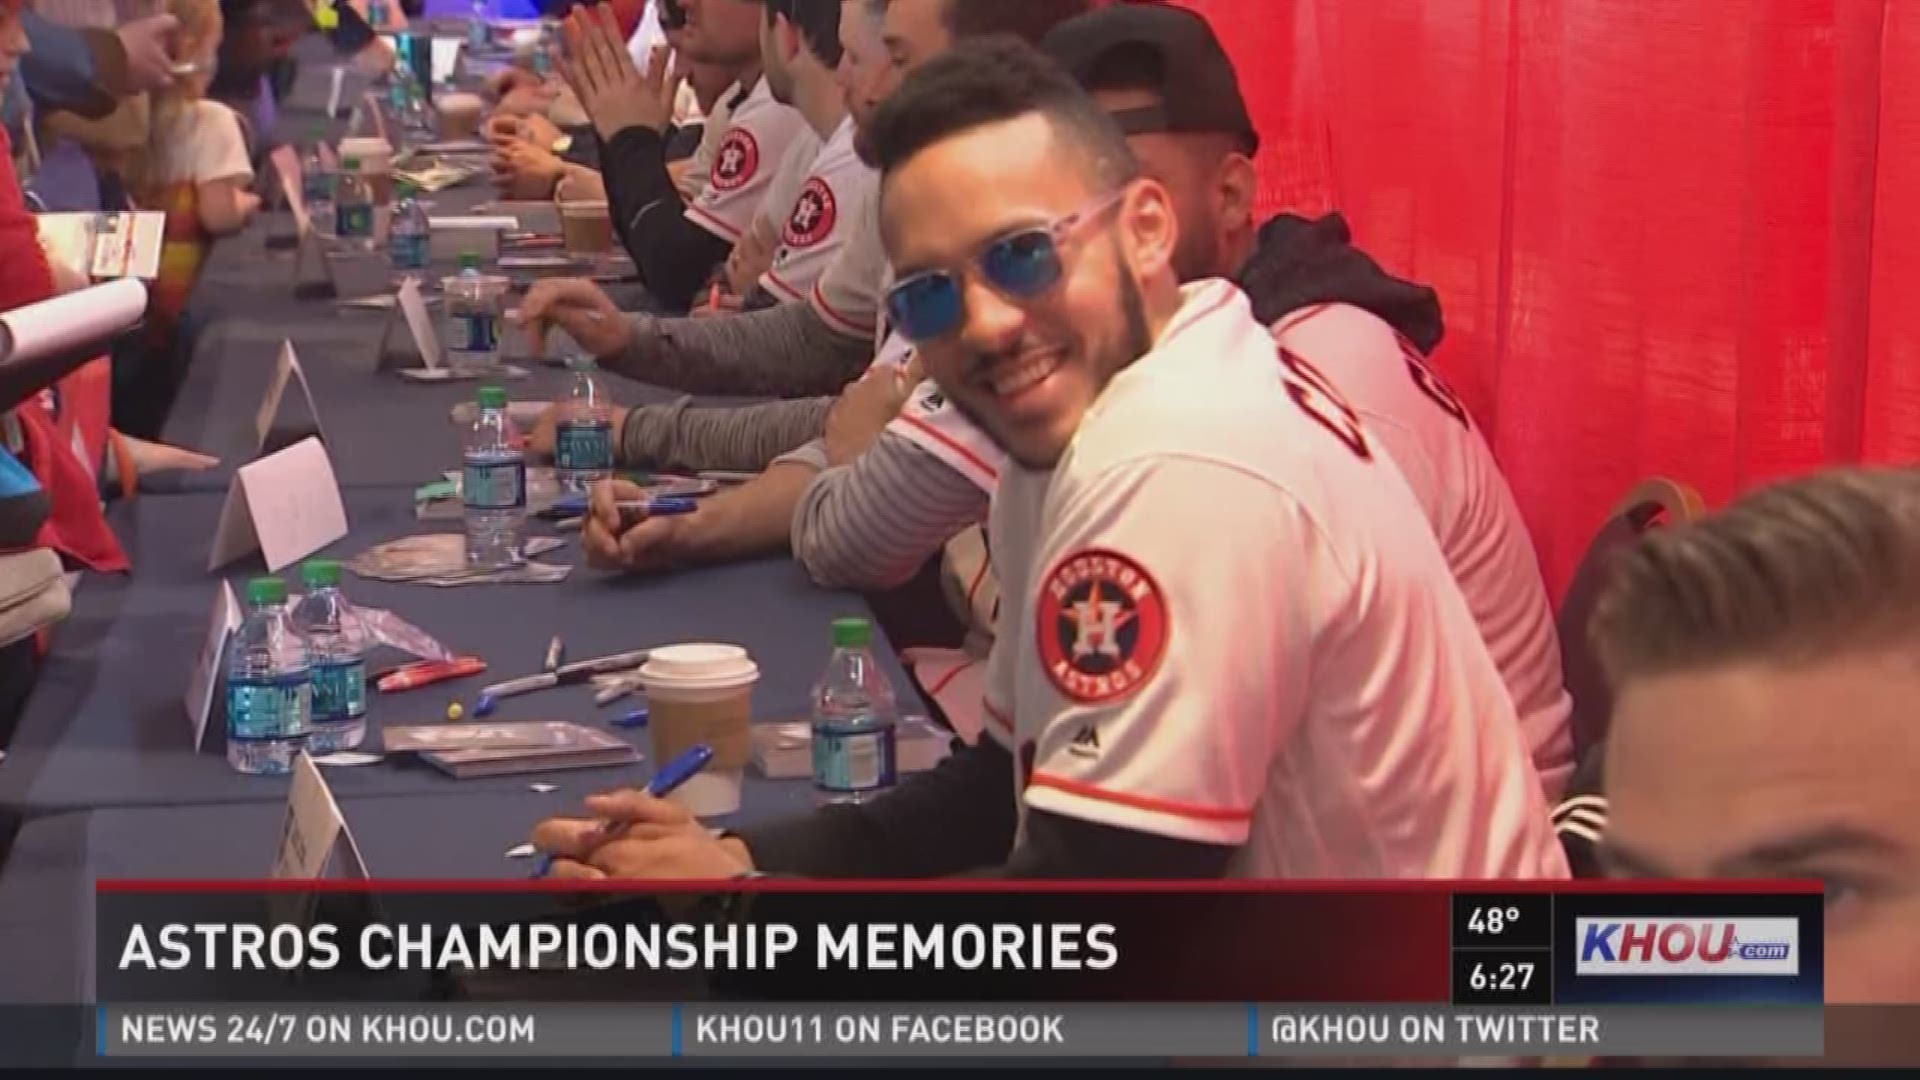 KHOU 11 sports reporter Daniel Gotera caught up with AJ Hinch and some of the Astros World Series Champs at the annual Fan Fest on Saturday at Minute Maid Park.